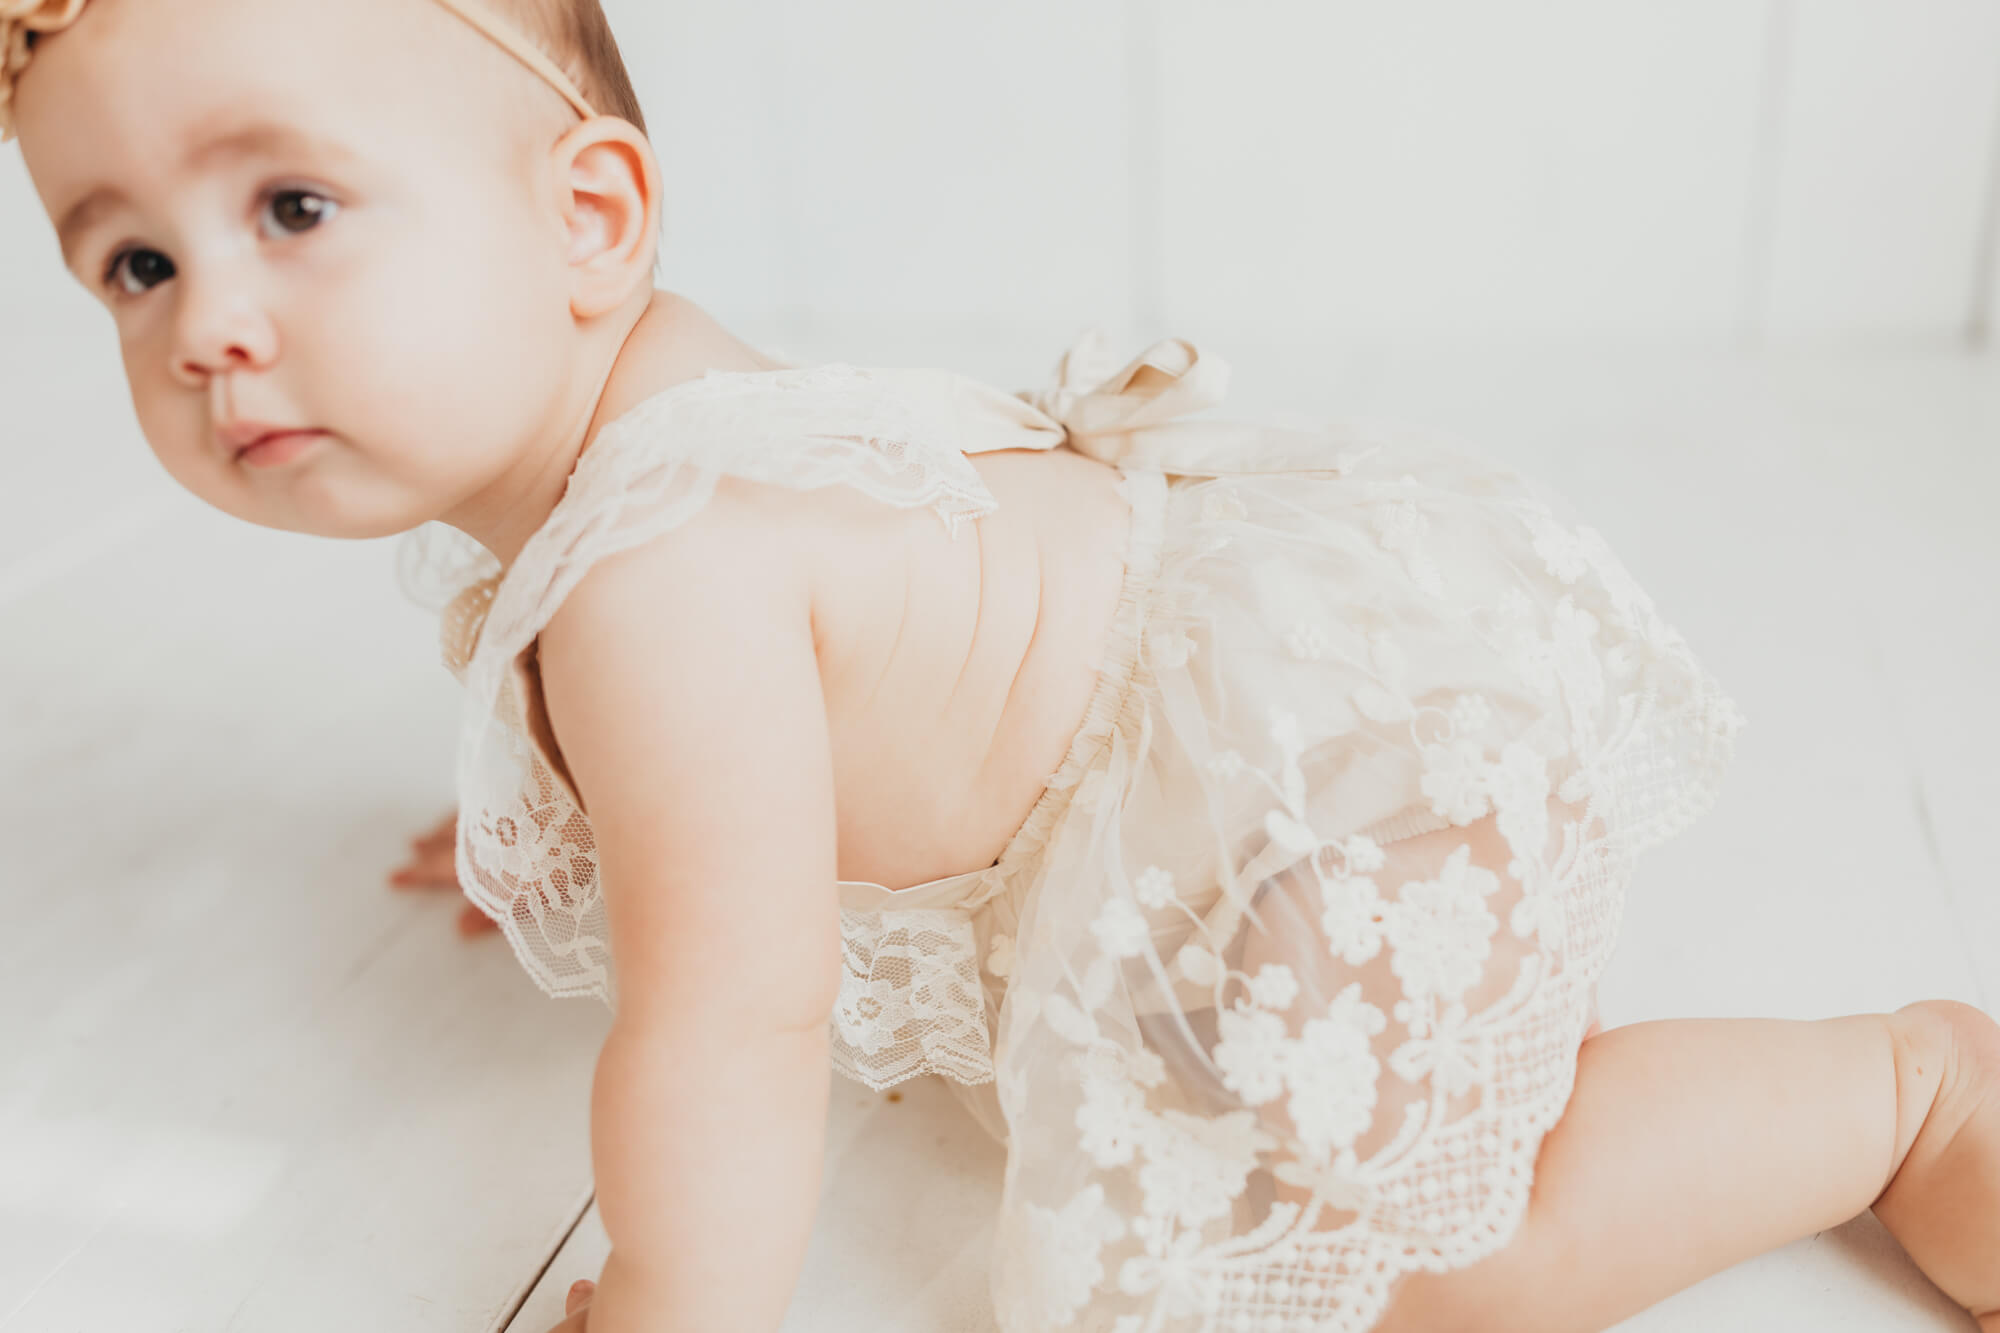 Baby girl crawling during her first birthday photos by Allyson Blankenburg.